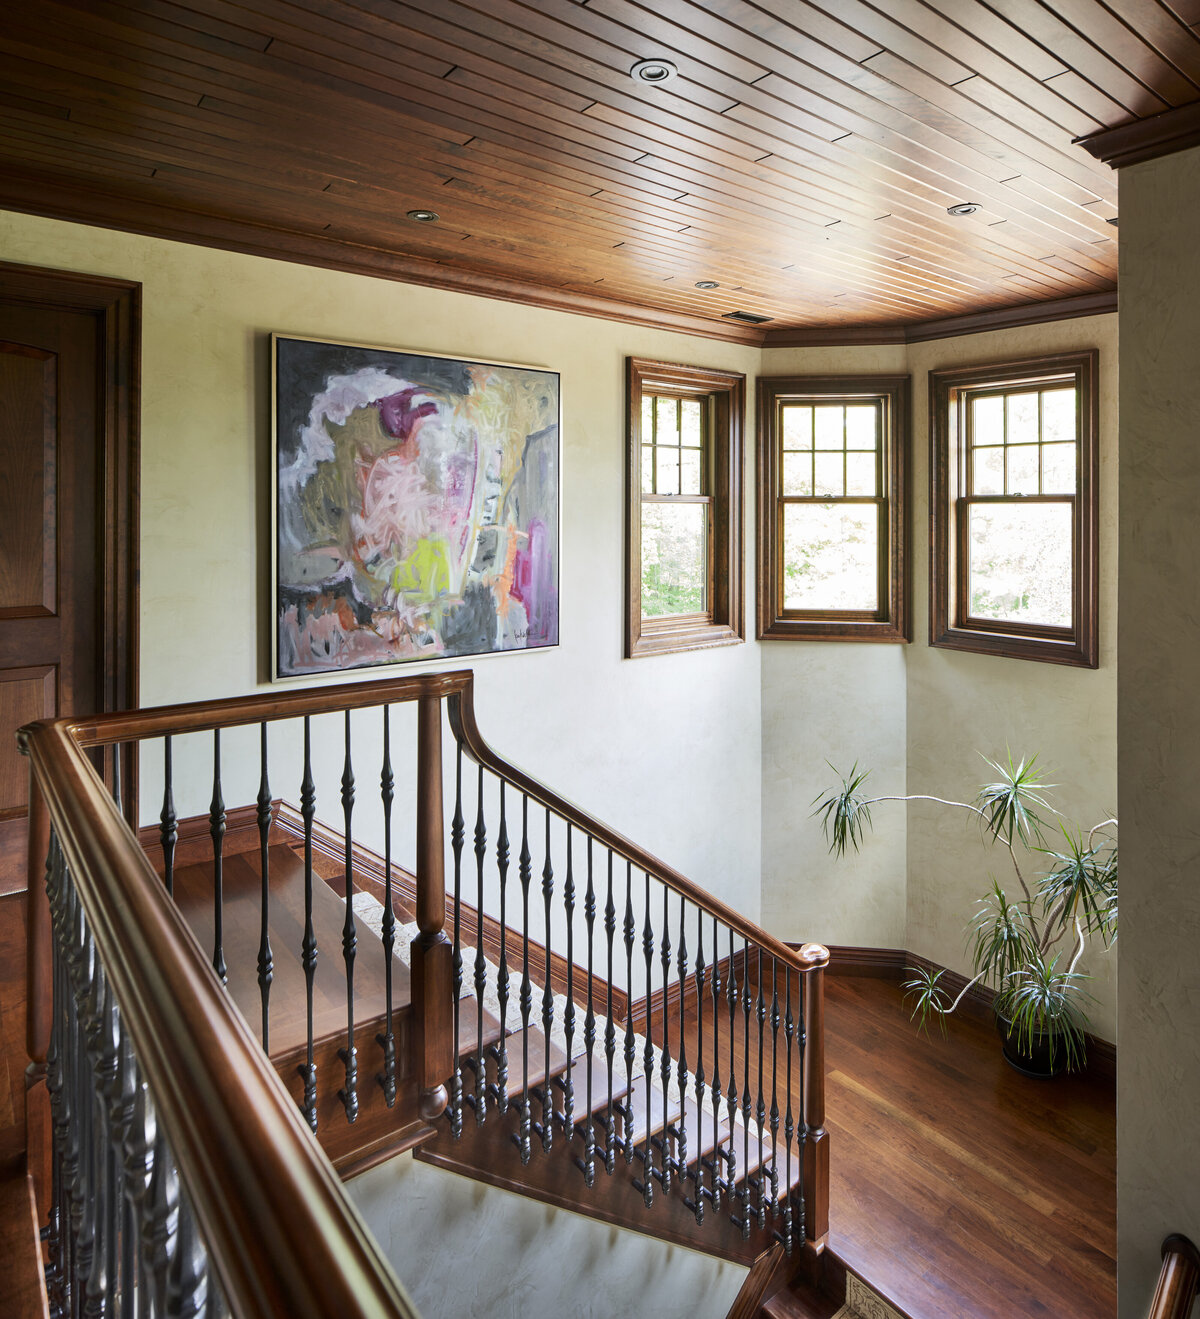 007-Hillside-Ancaster-Interiors-Staircase-Wood Ceiling